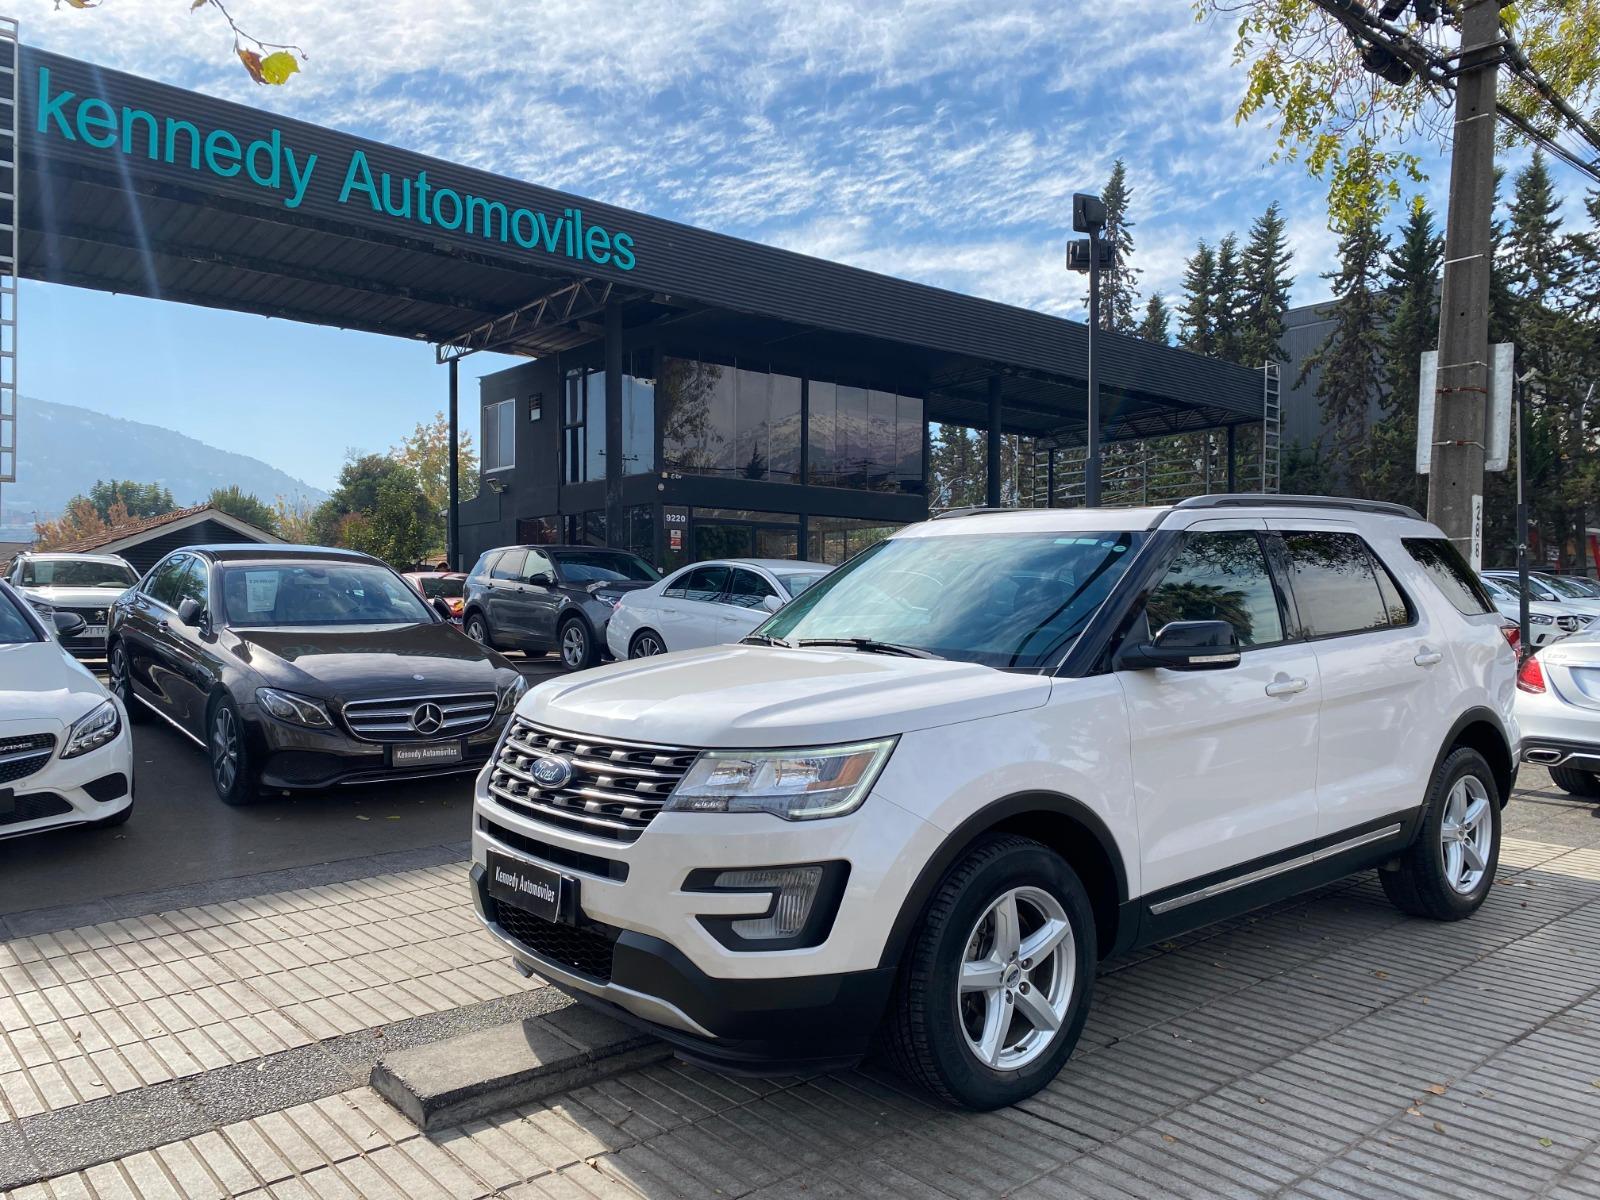 FORD EXPLORER 3.5 XLT Auto 4WD 2018 Impecable - KENNEDY AUTOMOVILES